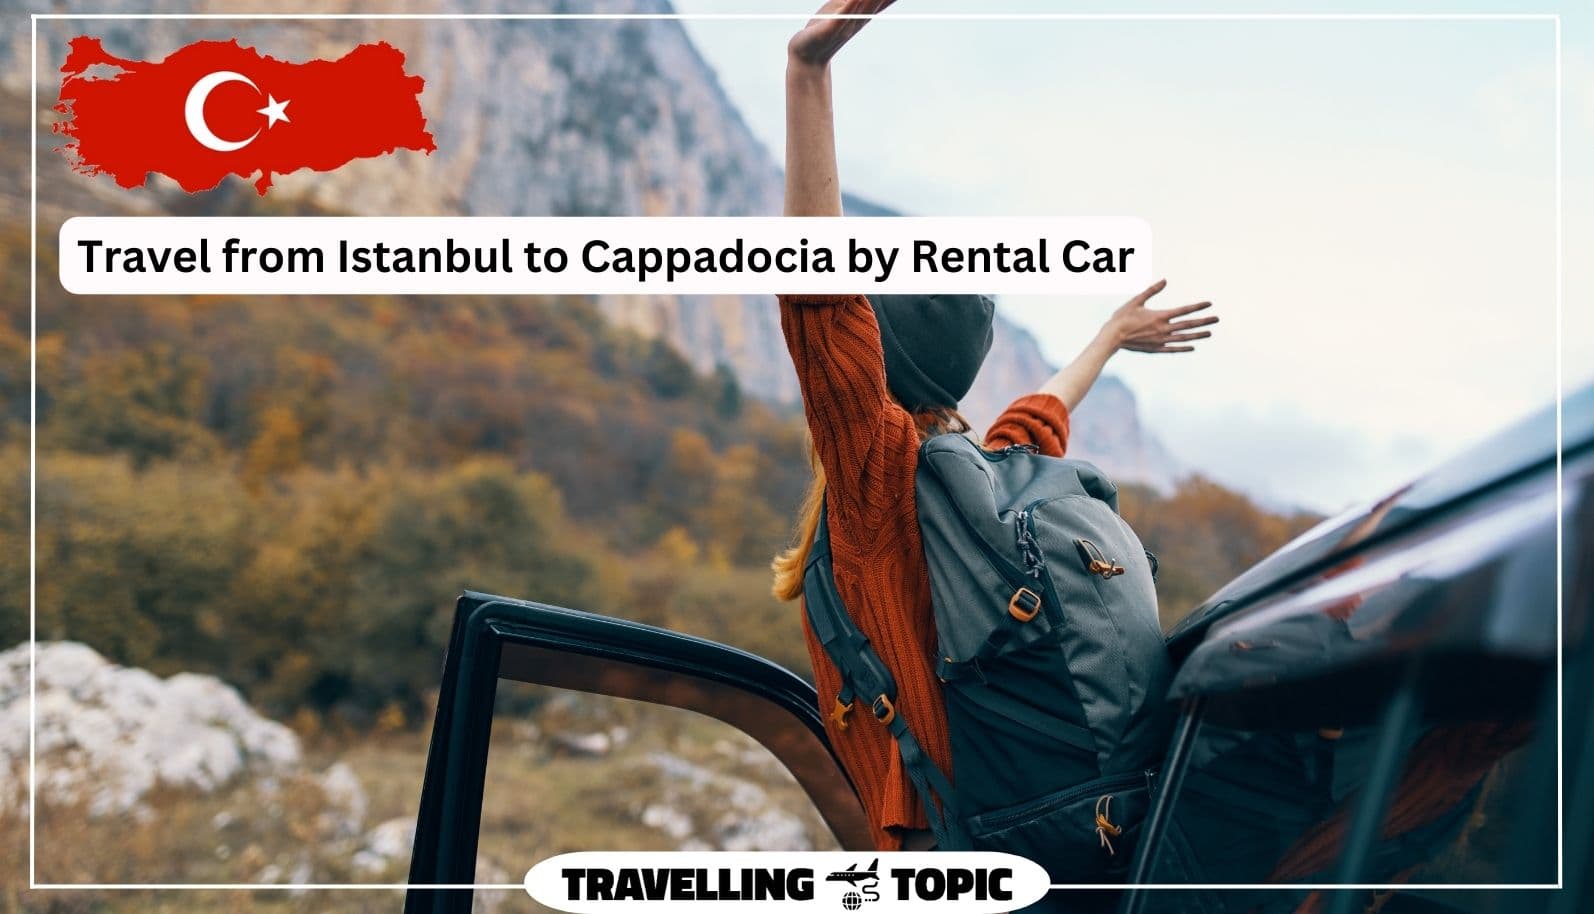 Travel from Istanbul to Cappadocia by Rental Car